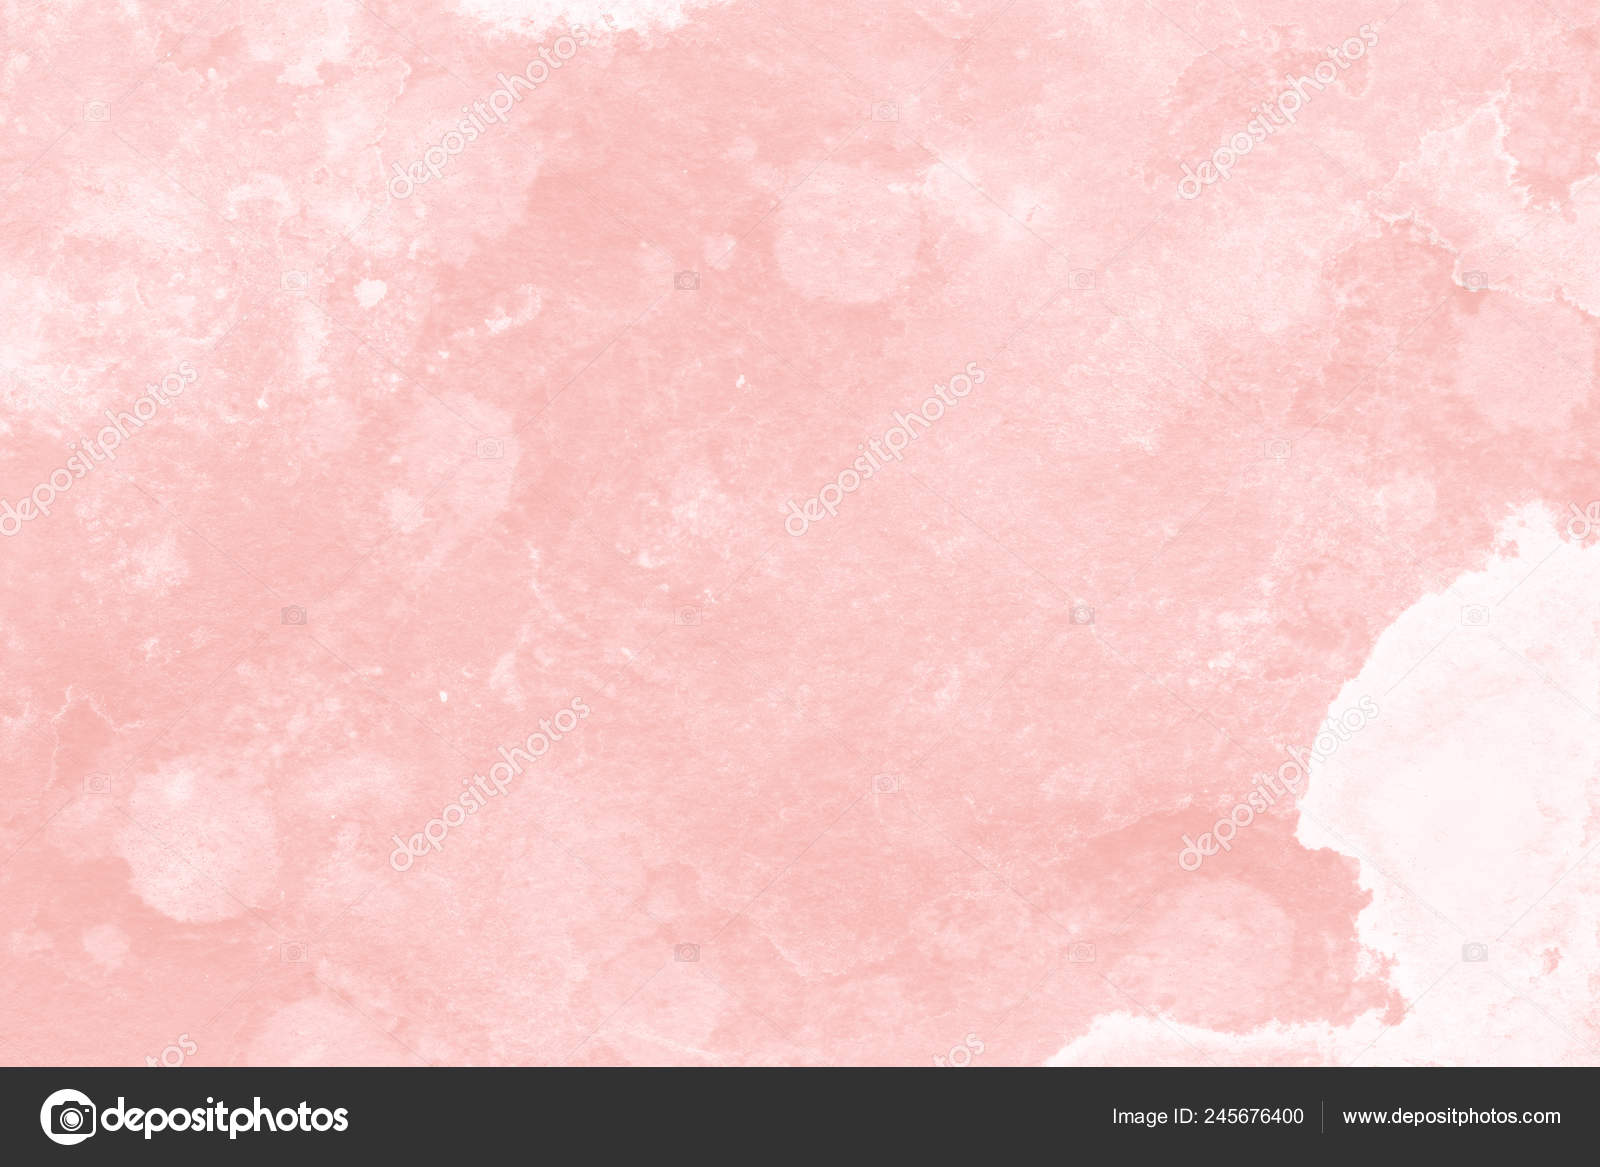 Light Pink Watercolor Background With Soft Texture Stock Photo